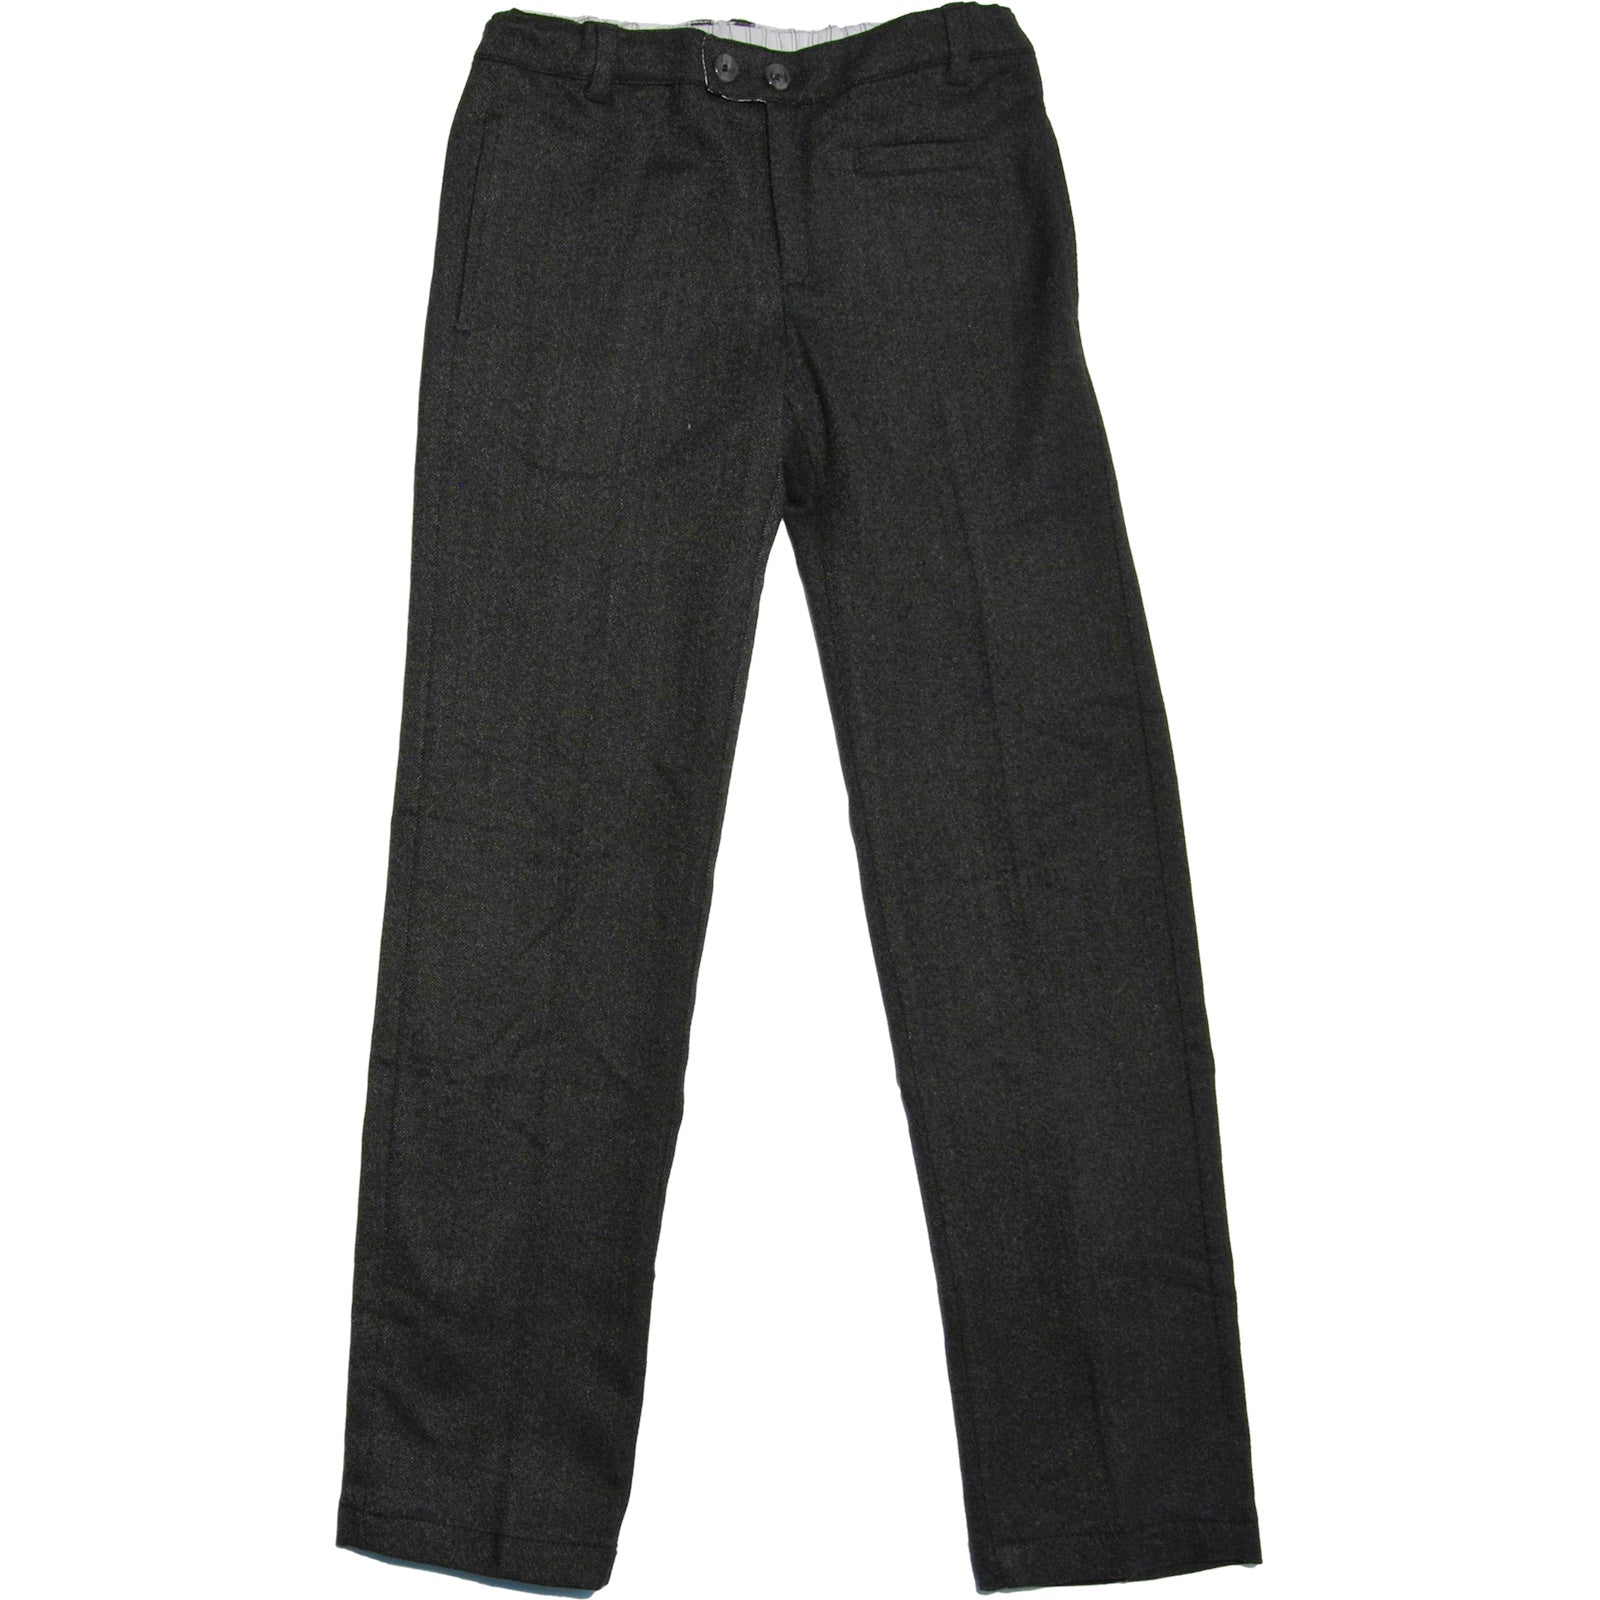 
  Classic trousers in tweed from the children's clothing line Mirtillo, with side pockets, front...